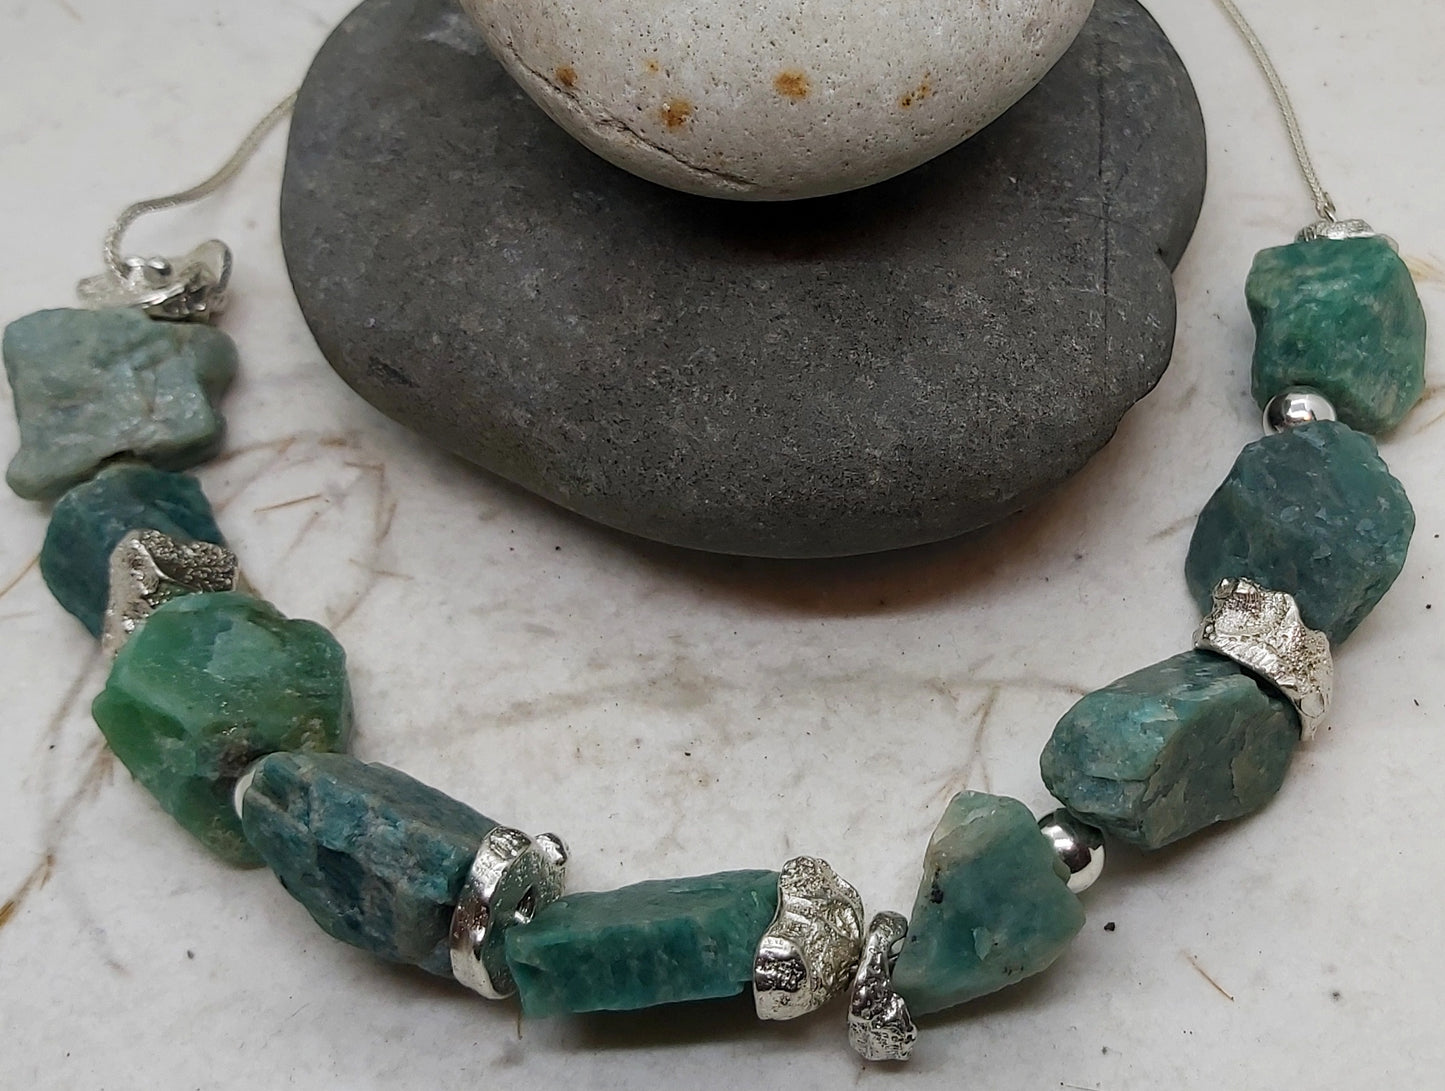 Raw Amazonite nuggets bead necklace- 20 inch length